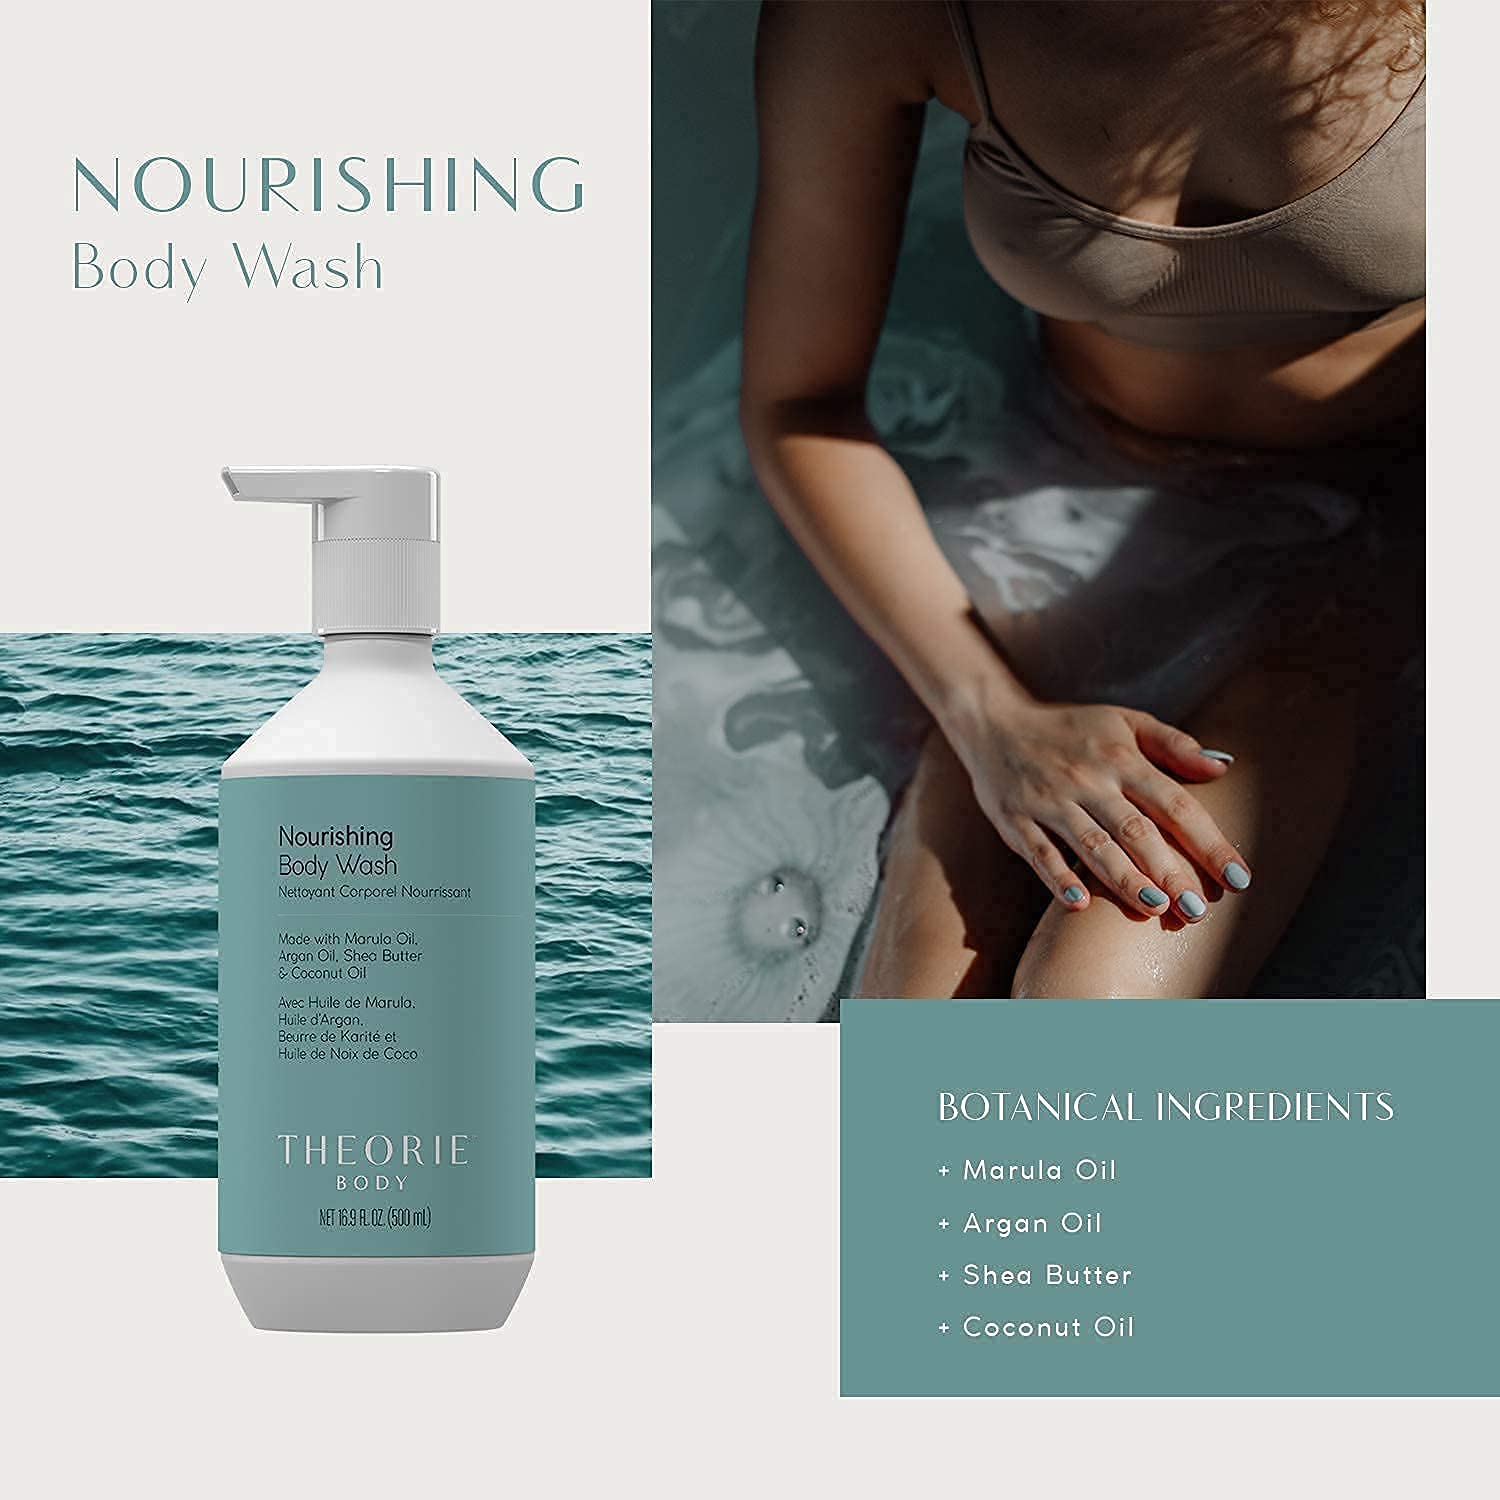 THEORIE Premium Nourishing Body Wash - Made with Marula Oil, Argan Oil, Coconut Oil & Shea Butter - Featuring our Amber Rose Fragrance - Vegan - Suited for All Skin Types - Pump Bottle 500mL